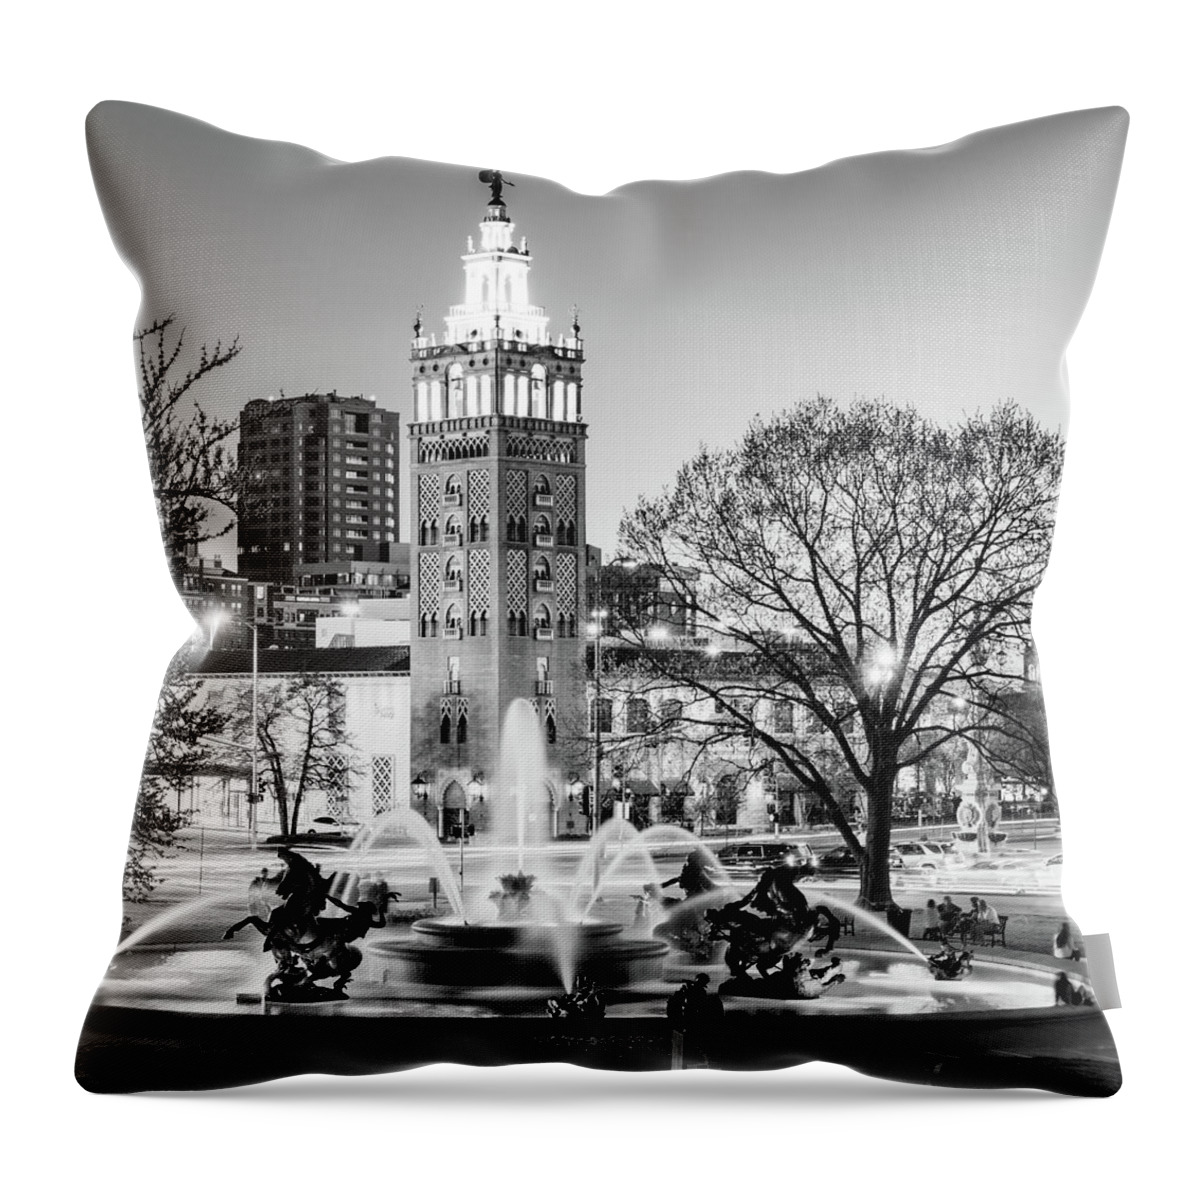 Jc Nichols Fountain Throw Pillow featuring the photograph JC Nichols Fountain and Kansas City Plaza - Black and White 1x1 by Gregory Ballos